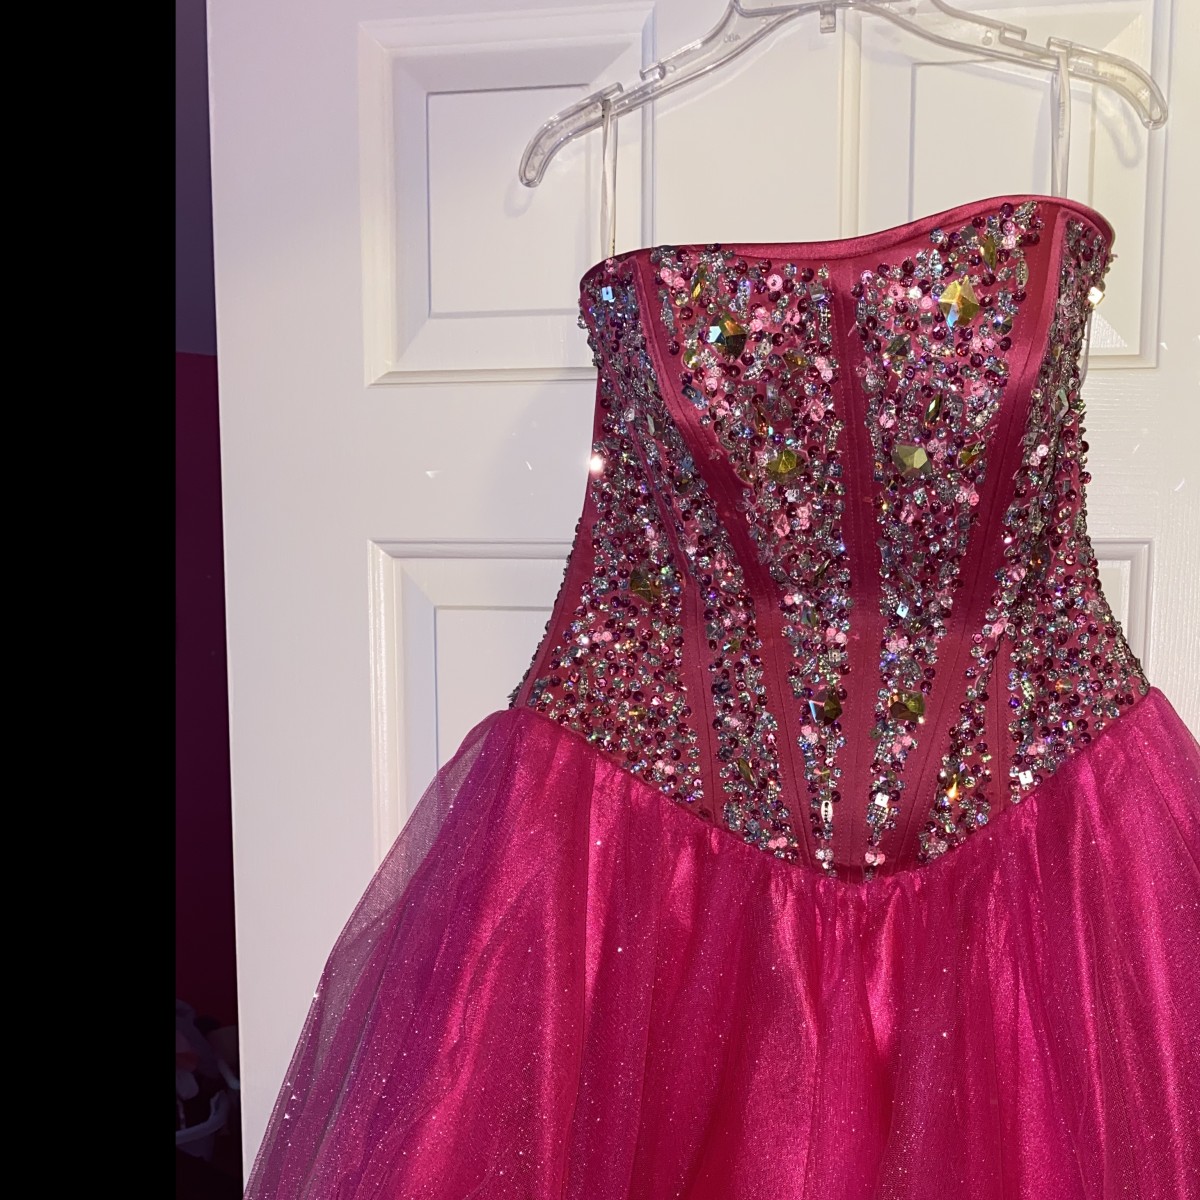 Pink Sparkly Corseted Dress by Hannah S